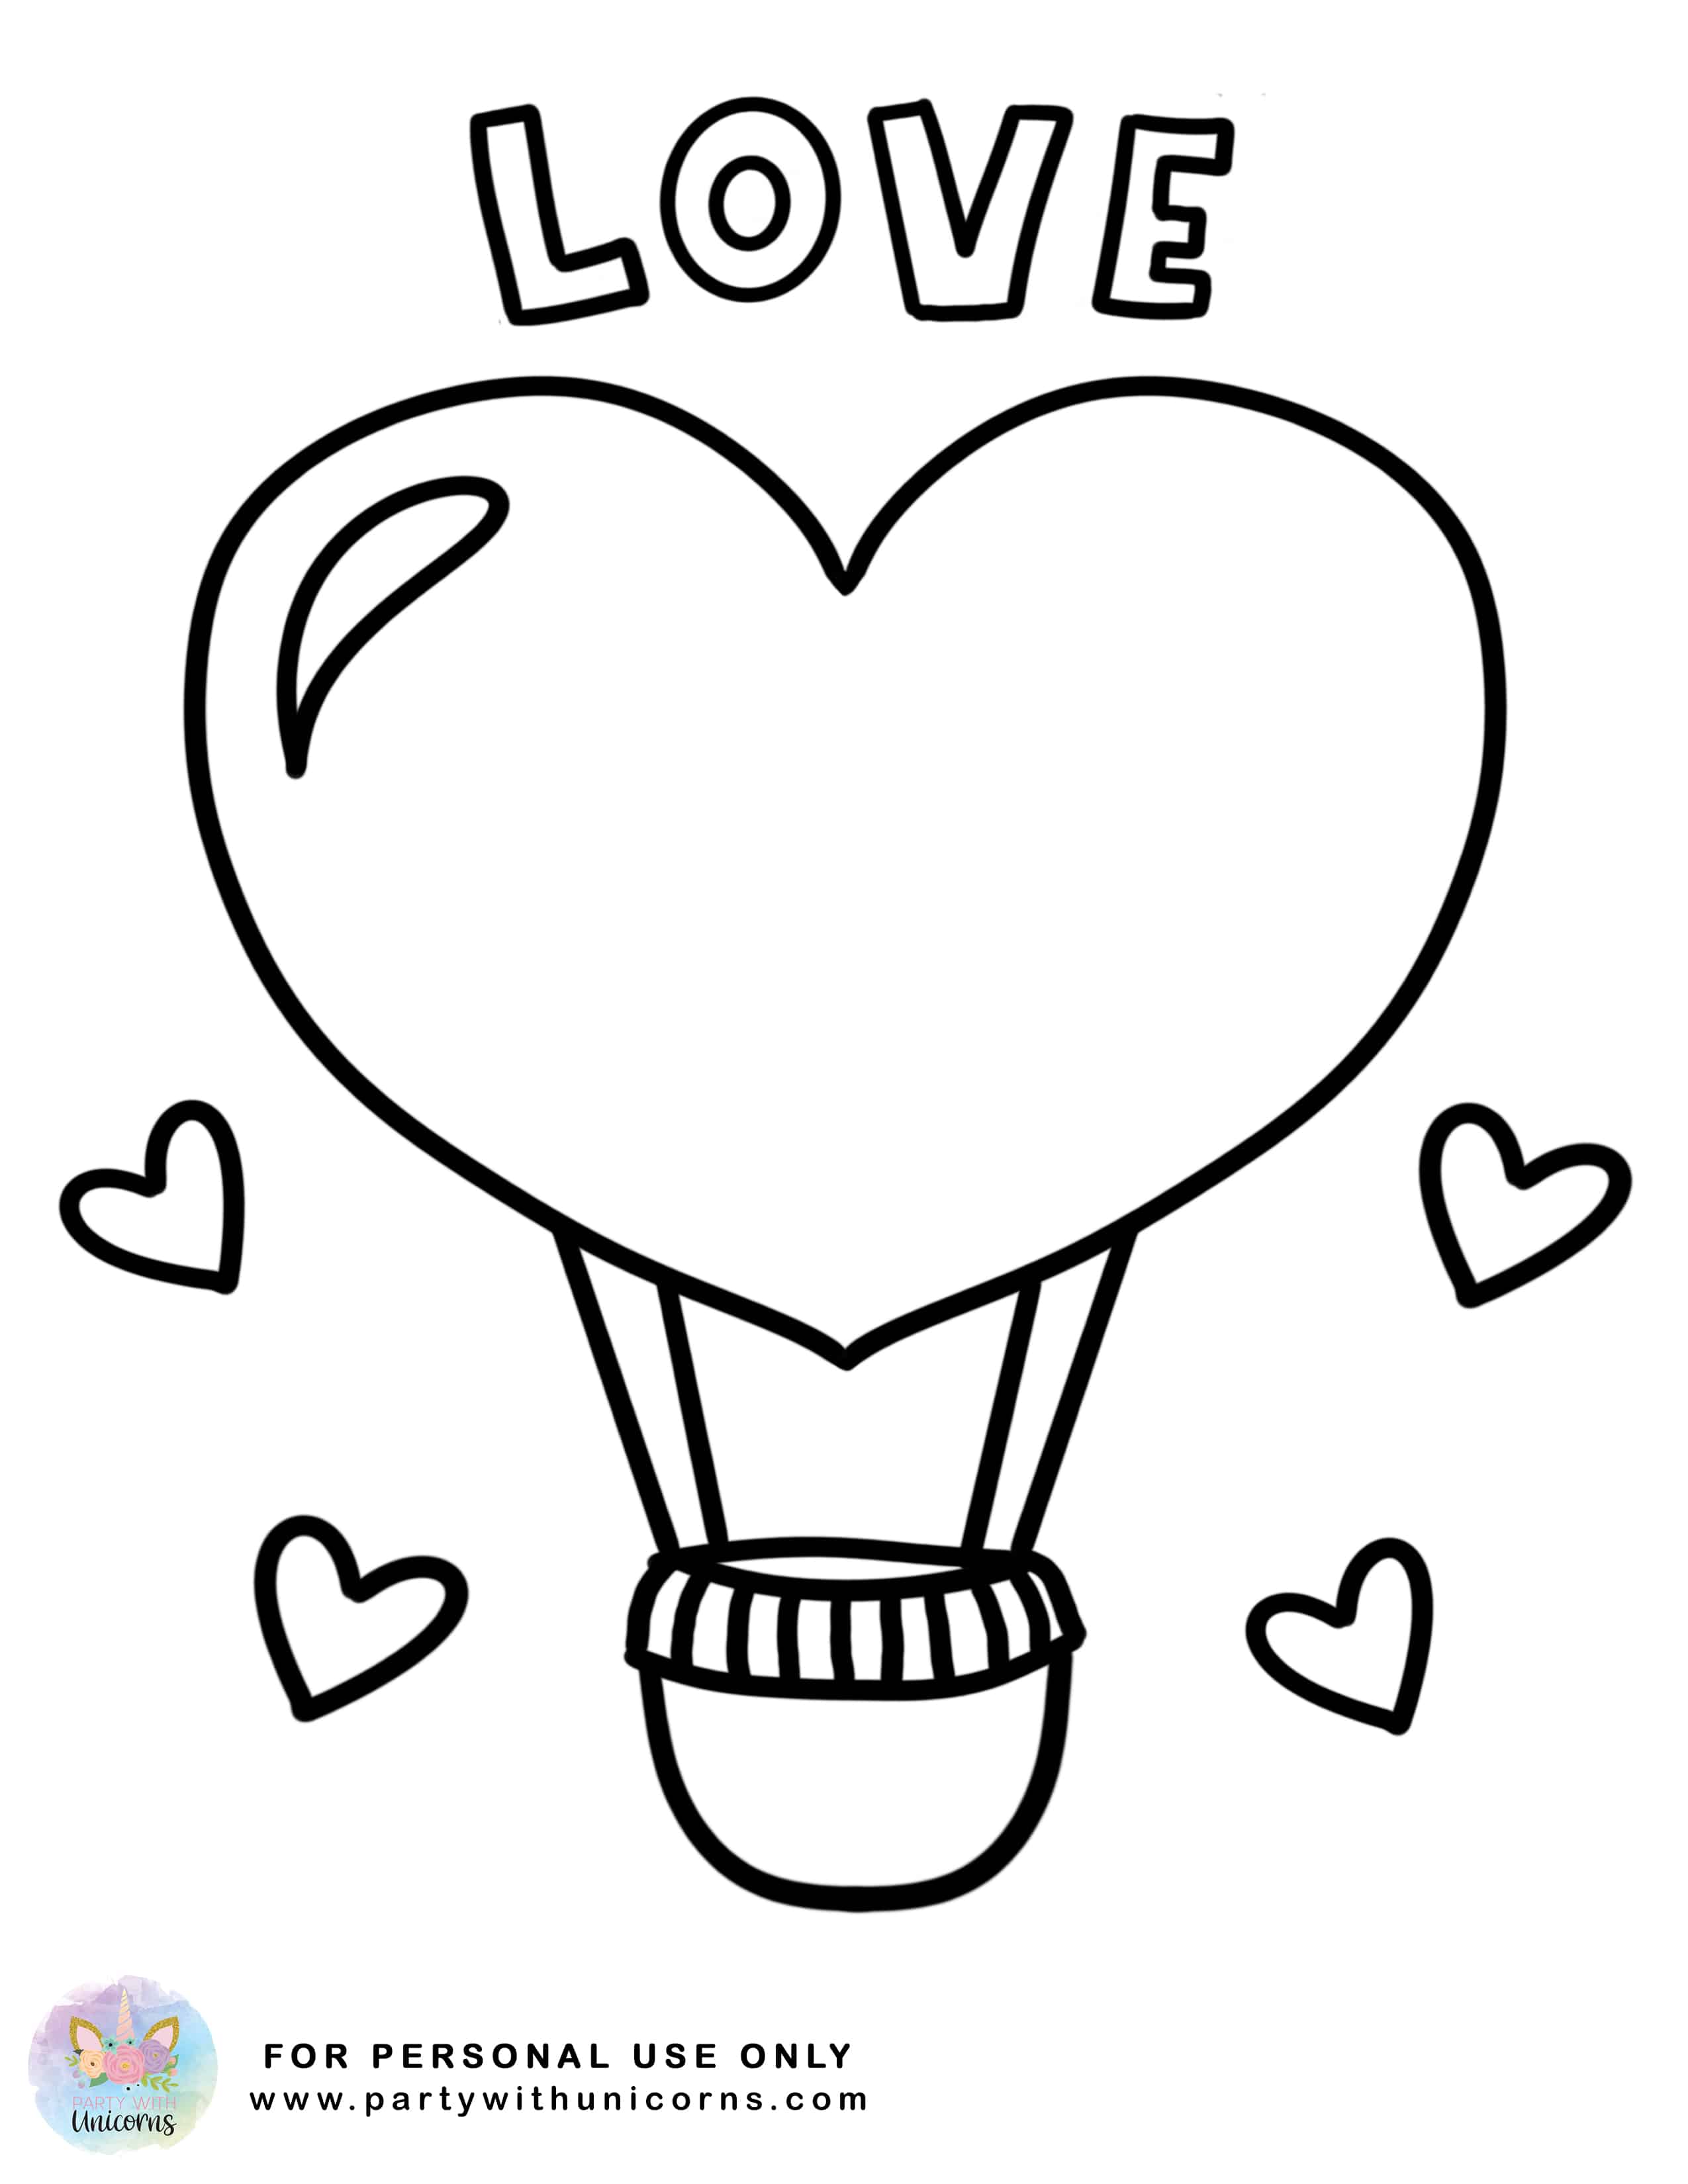 Valentines Coloring Pages - Free Coloring Pages for Kids